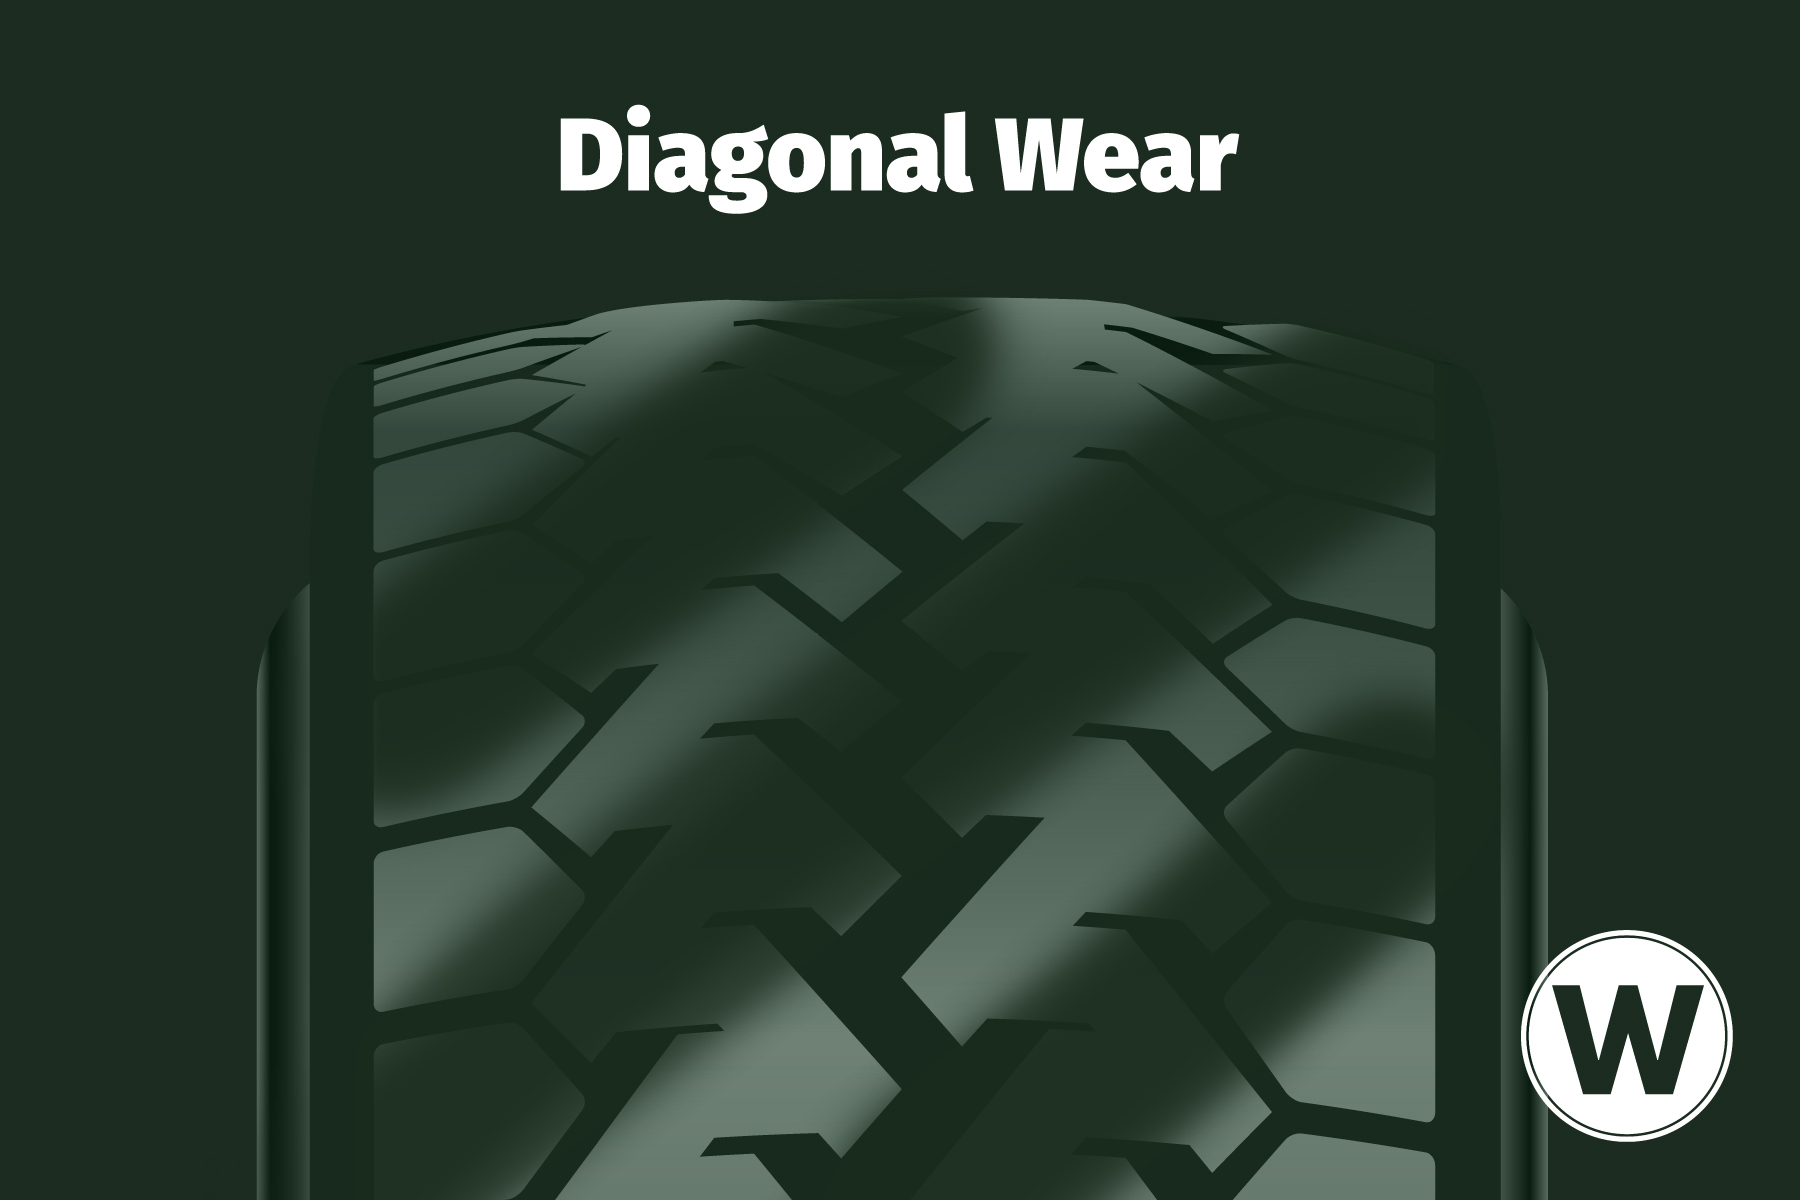 A wear pattern diagram that shows where to find diagonal wear on your commercial steer tires.